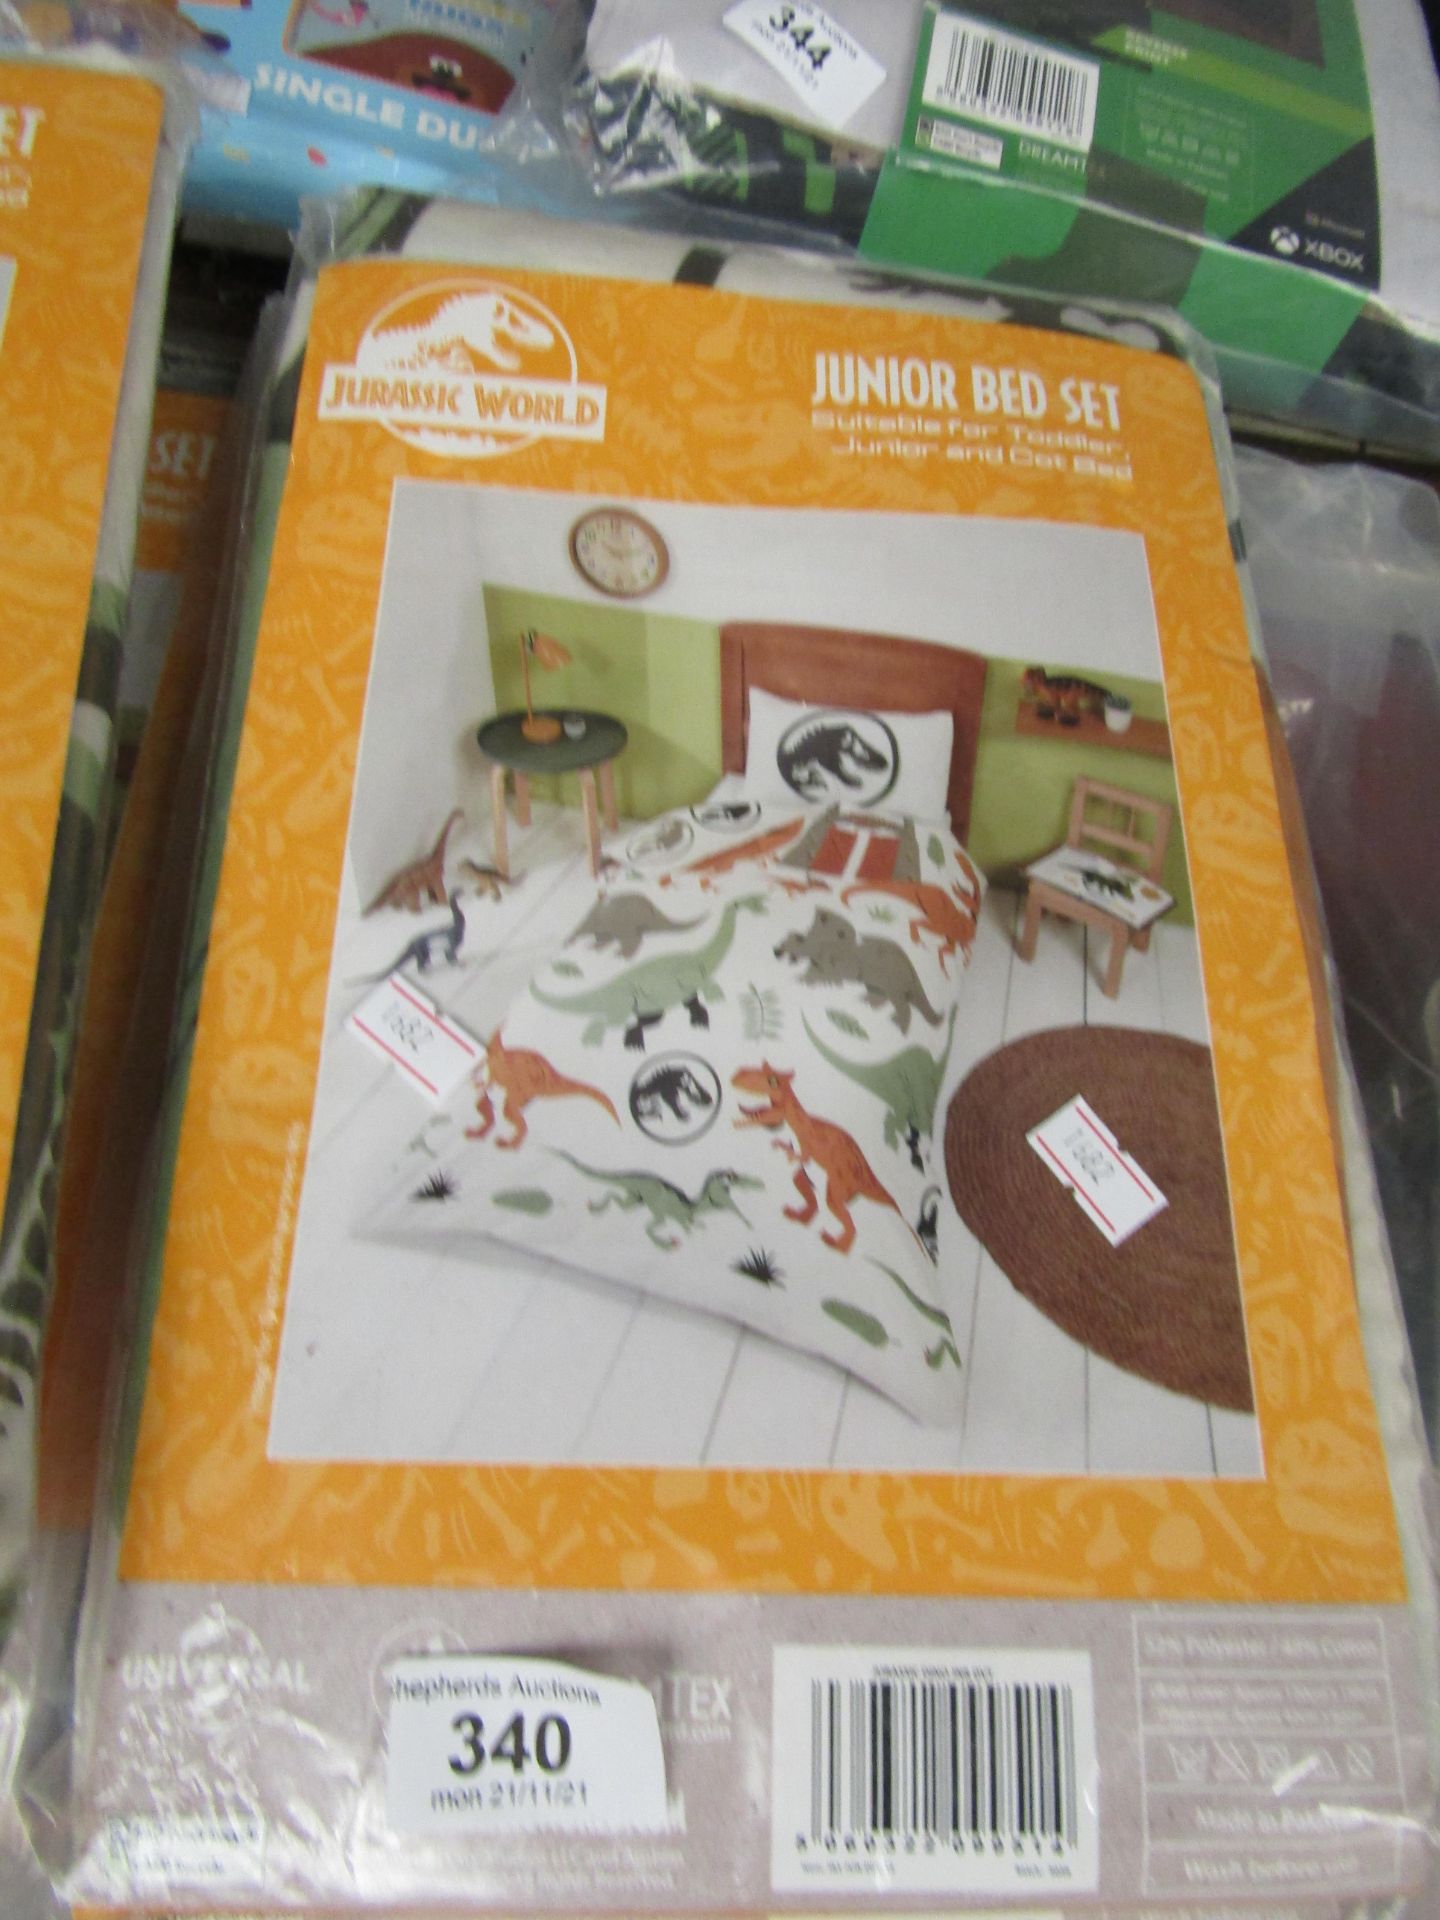 1 x Jurassic World Junior Bed Set new & packaged see image